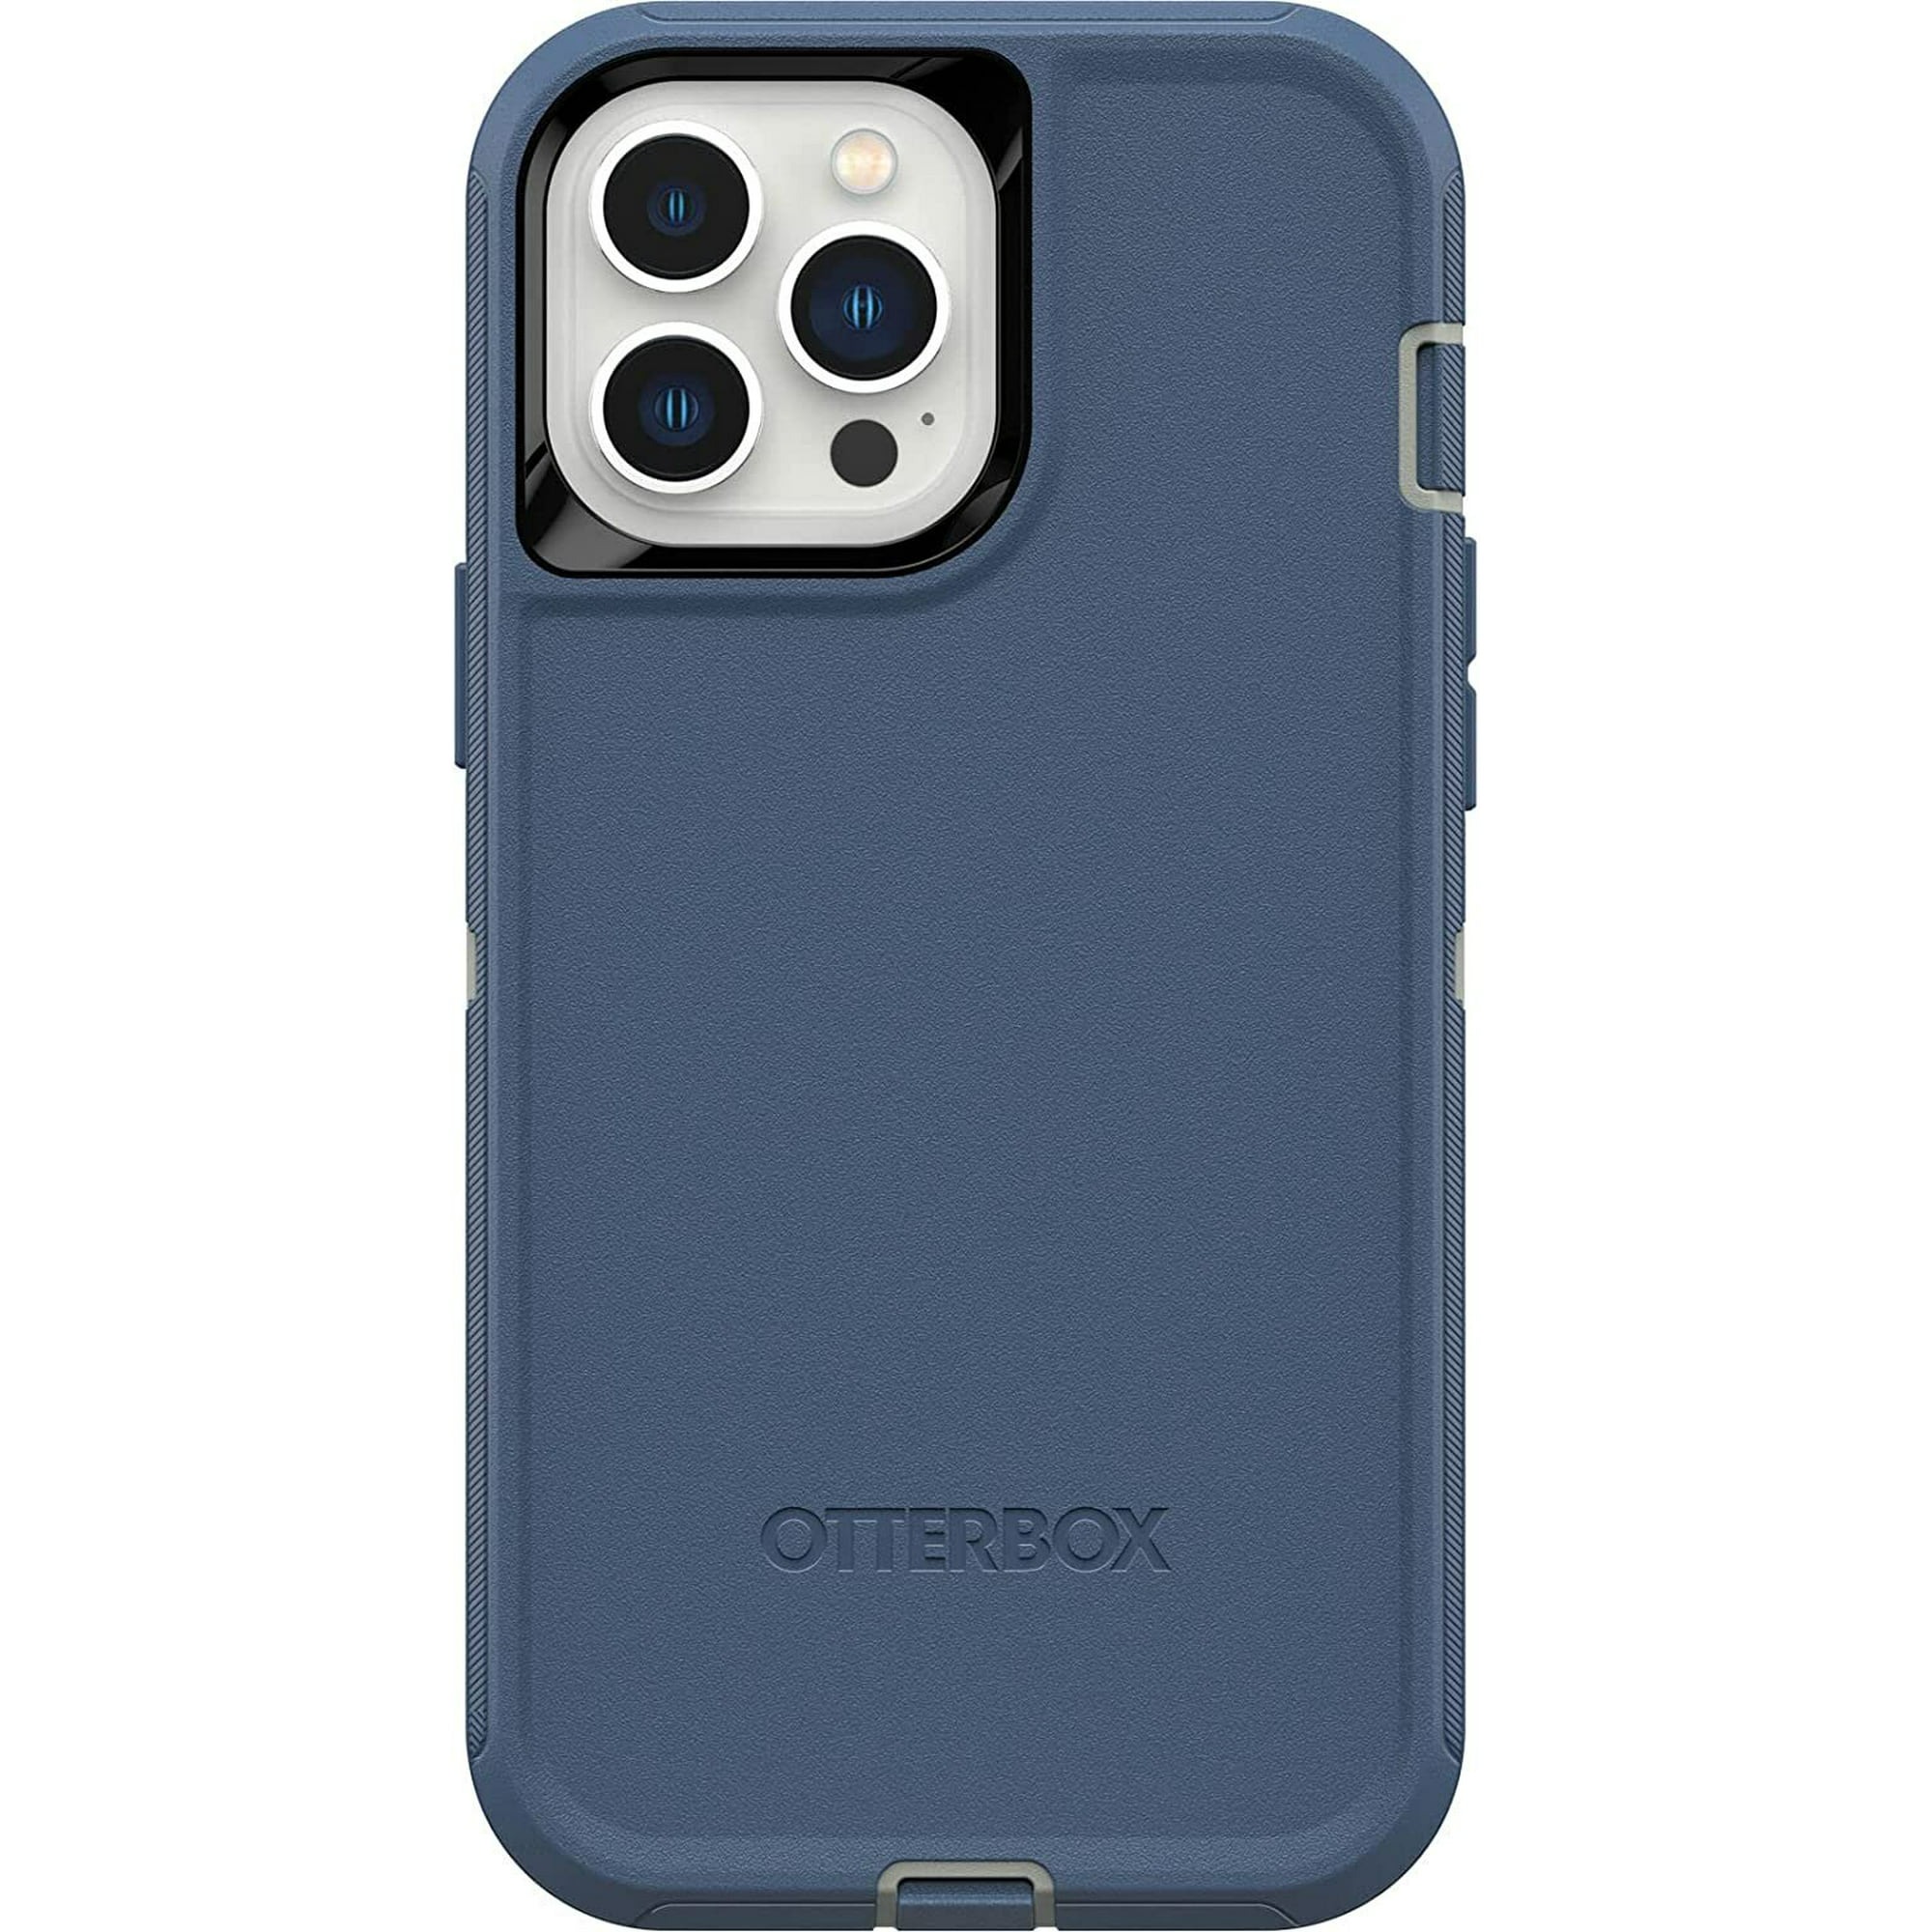 OtterBox DEFENDER SERIES Case for iPhone 13 Pro Max / 12 Pro Max - Fort Blue